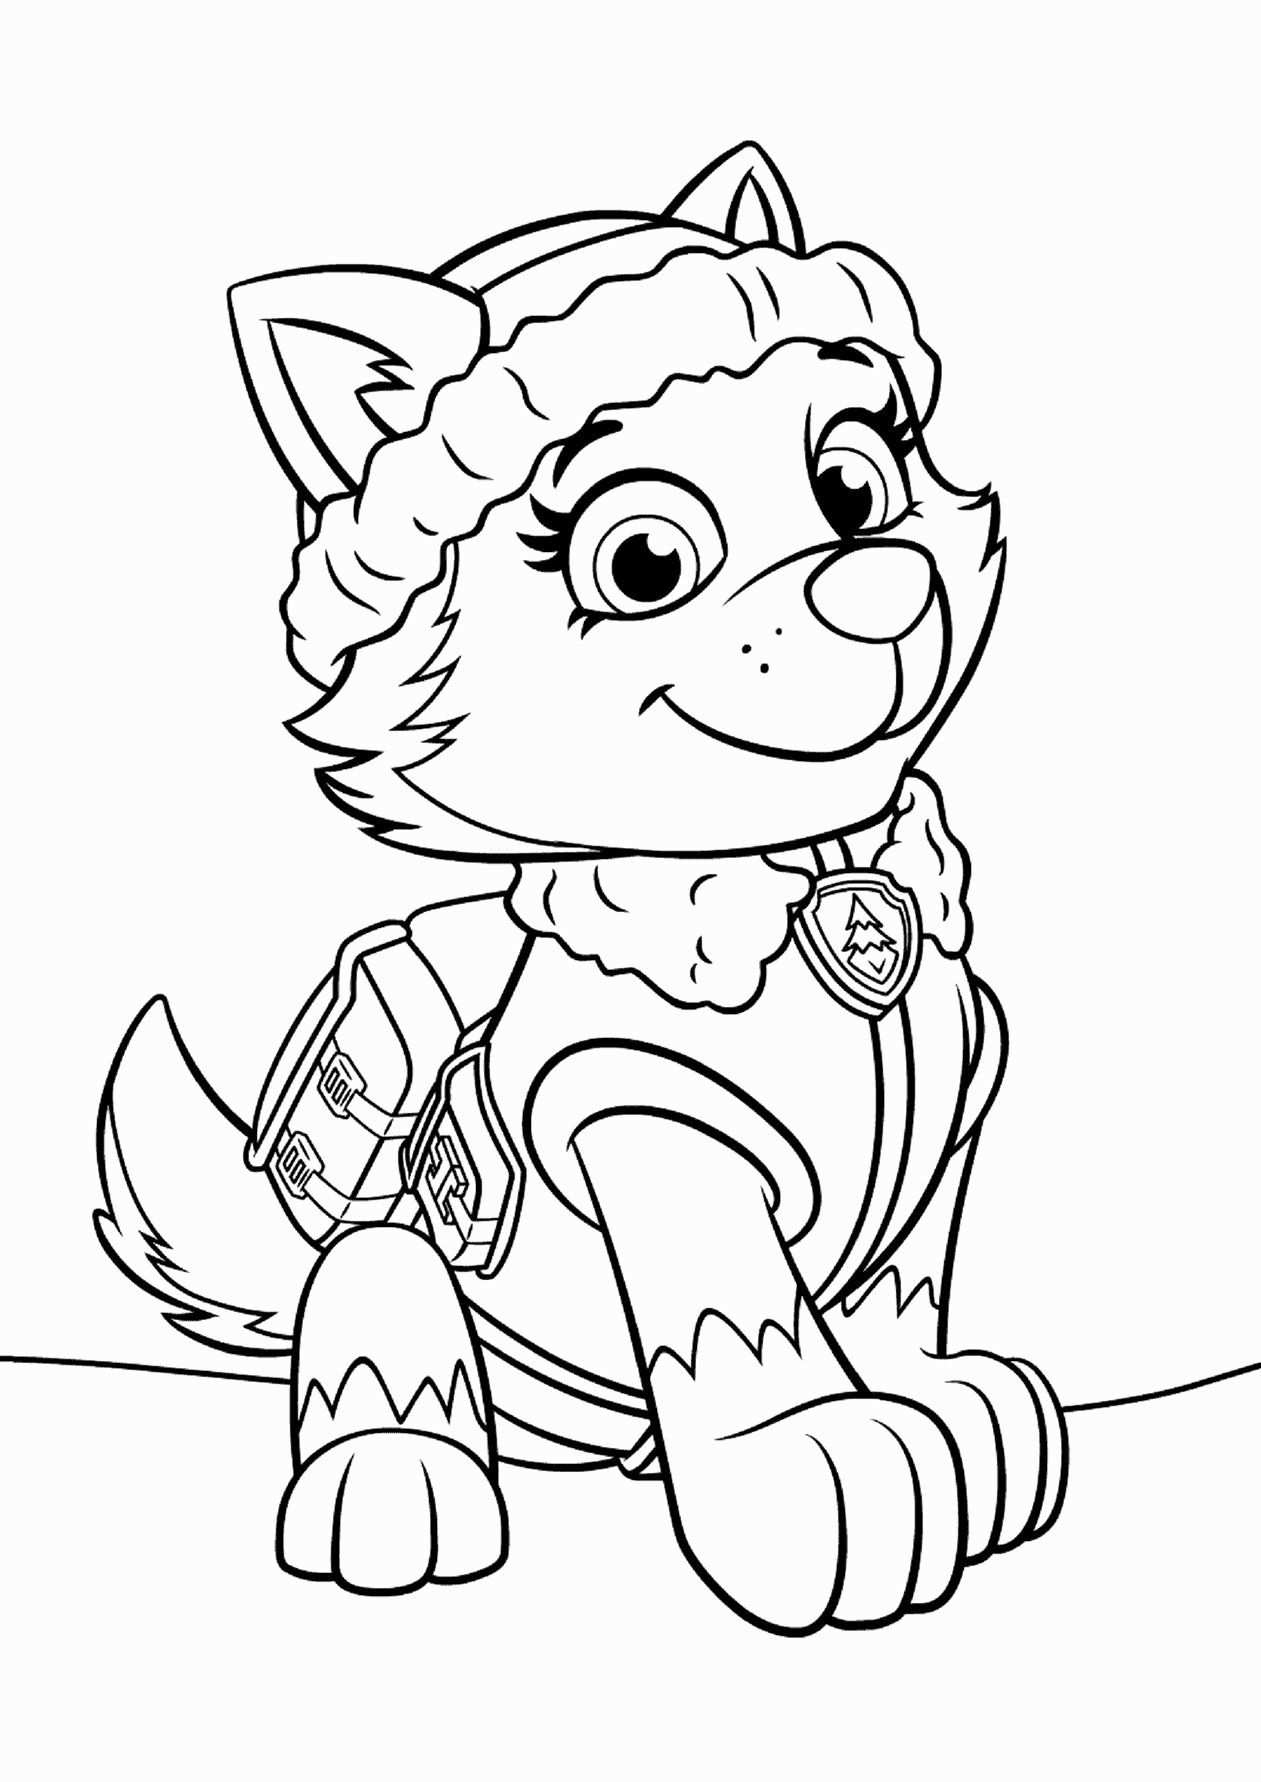 32 Paw Patrol Everest Coloring Page In 2020 With Images Paw